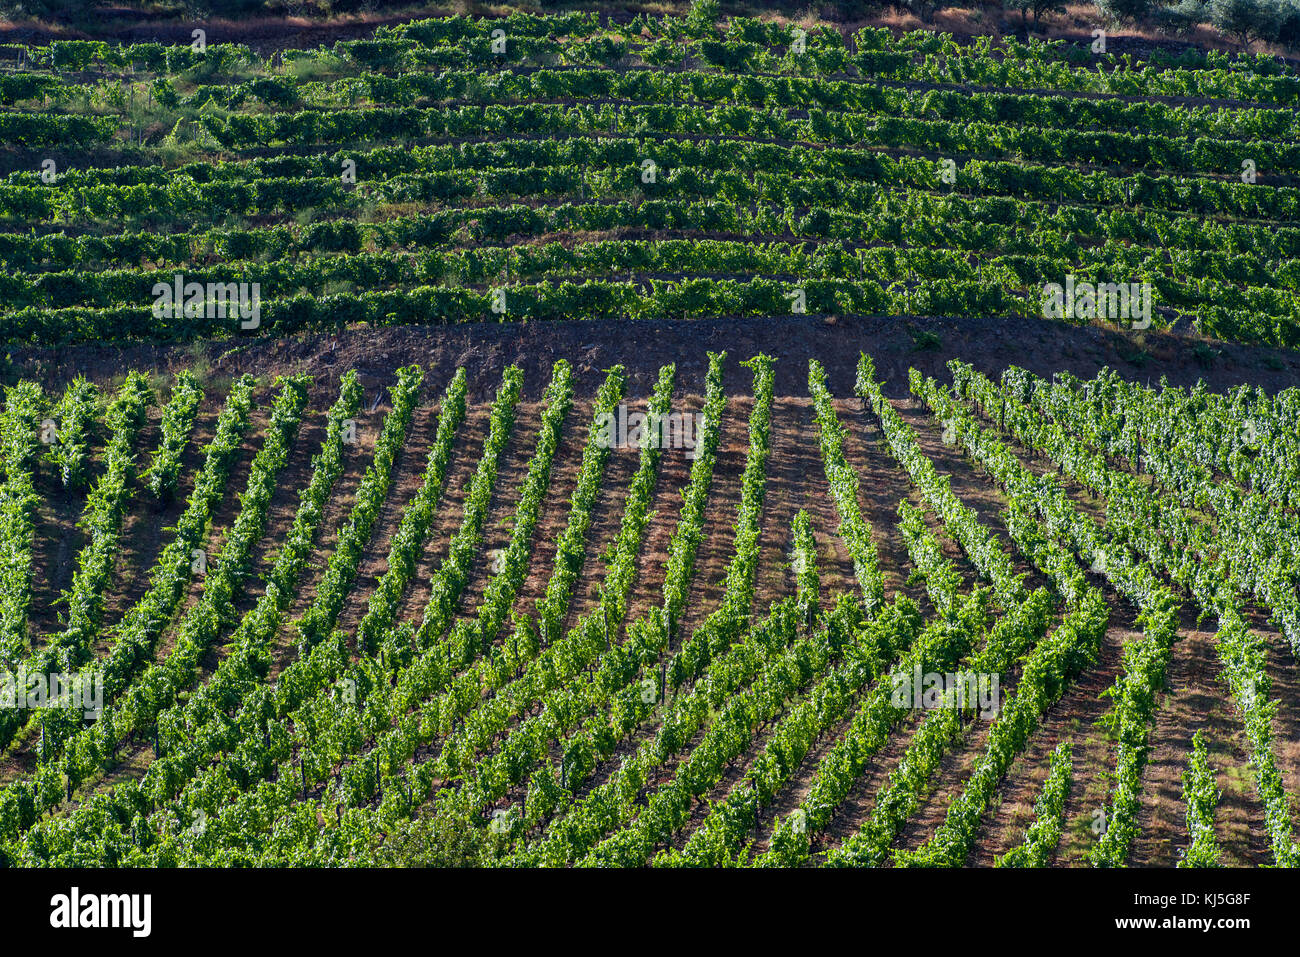 Vineyards cover the slopes above the Rio Douro, Portugal Stock Photo